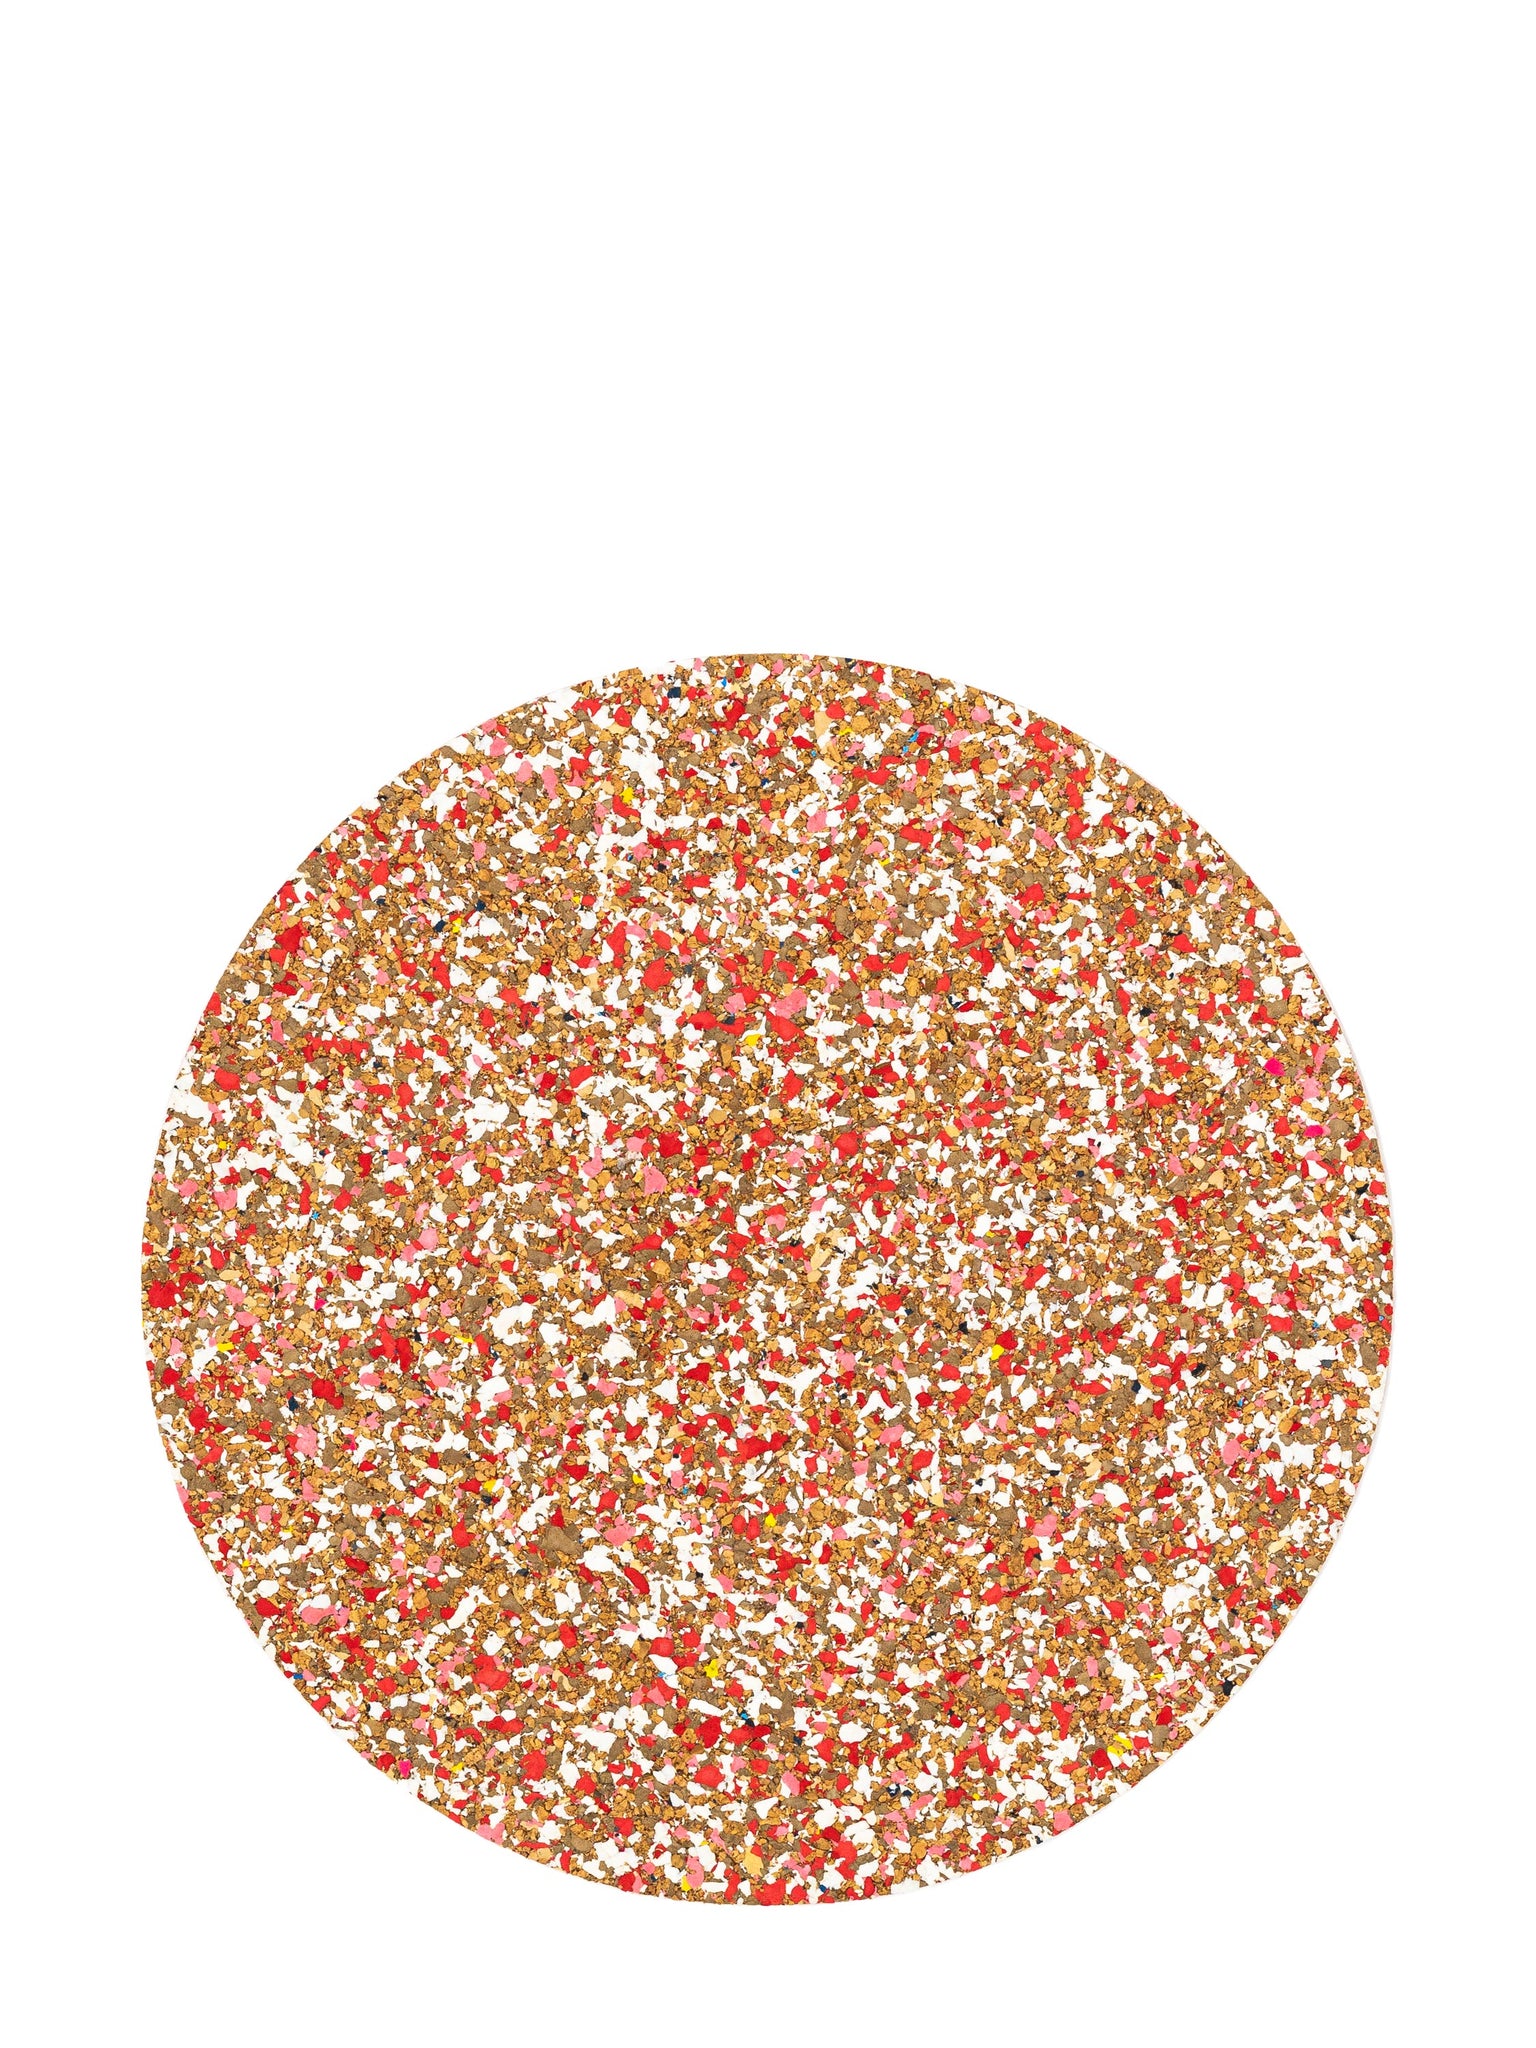 eco red recycled rounds cork placemat by Yod&CO